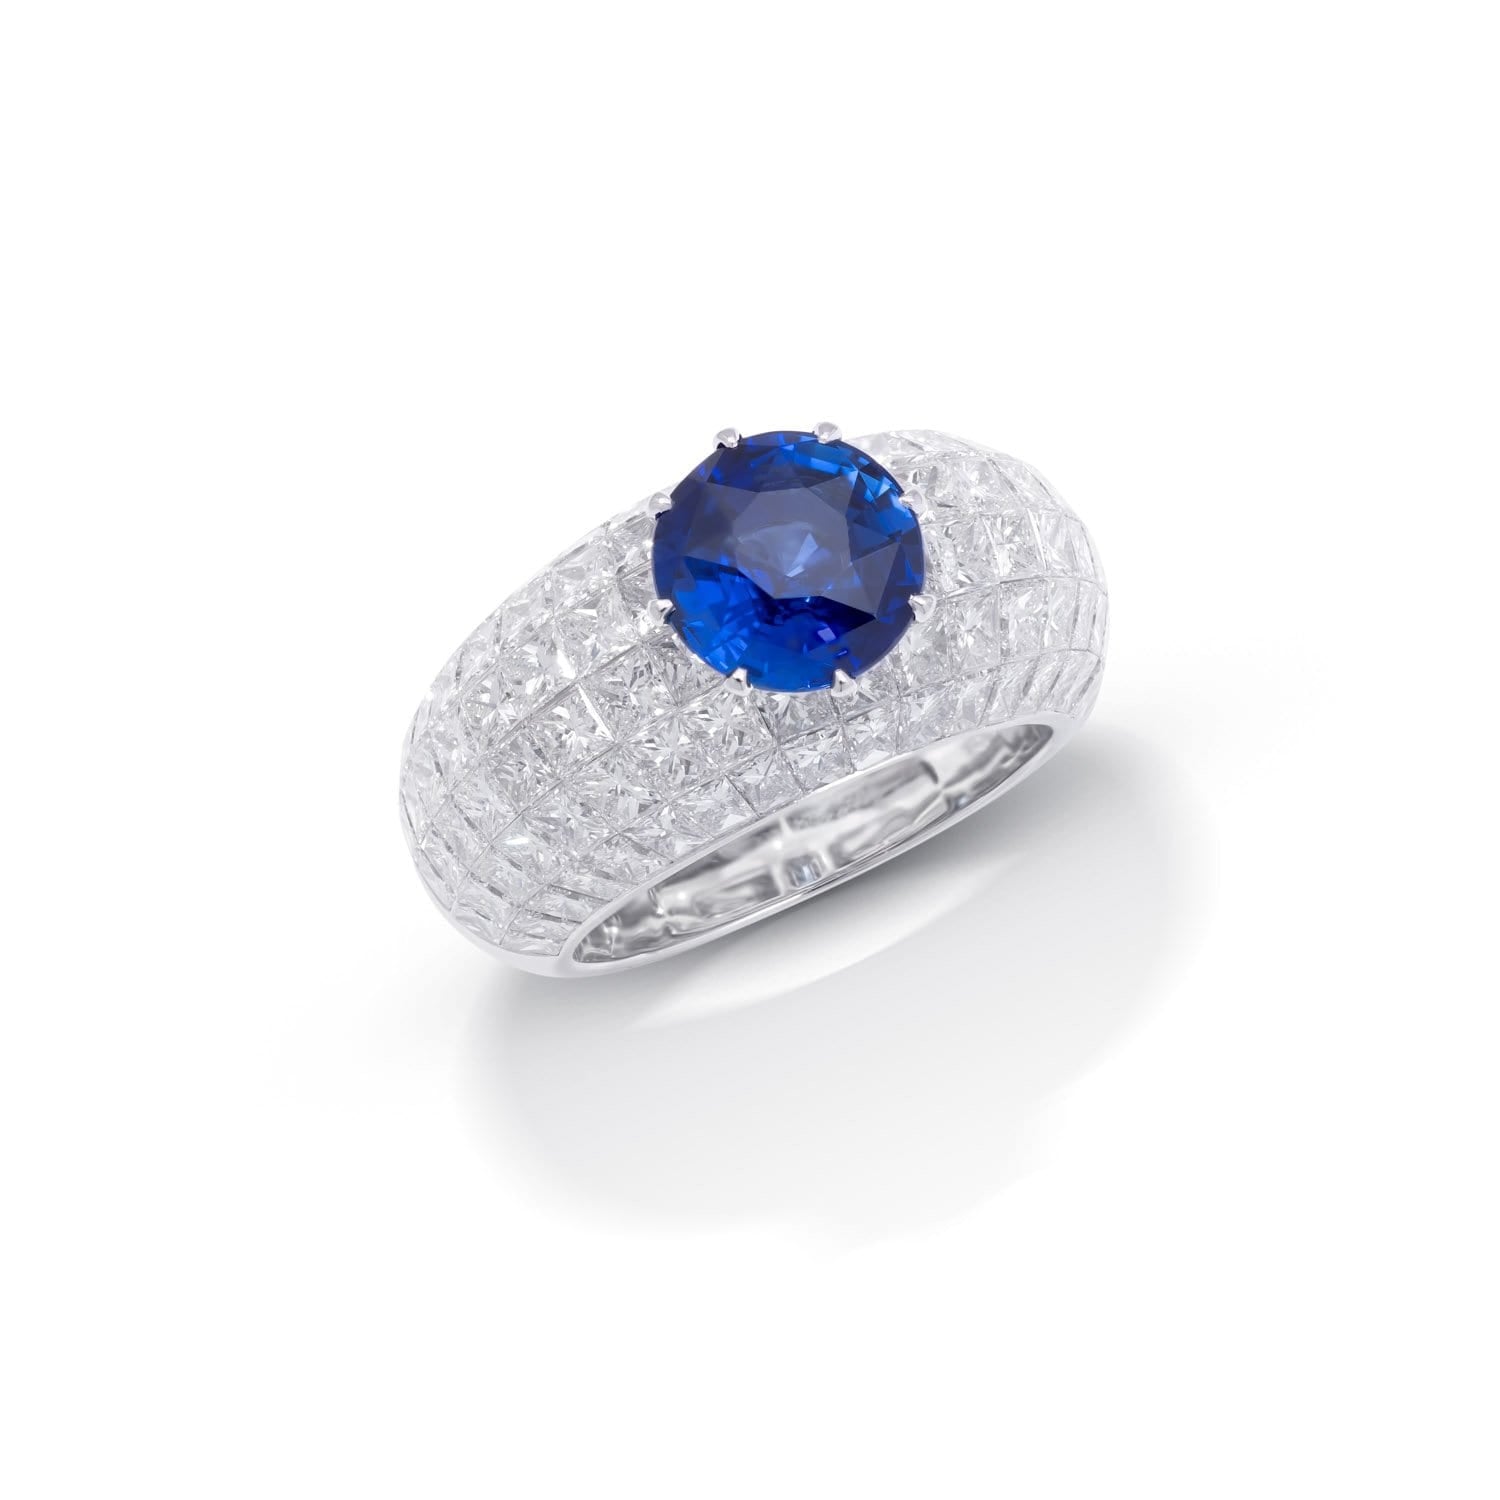 MOSAIC CLASSICAL Diamond Dome Ring with Round Sapphire Center